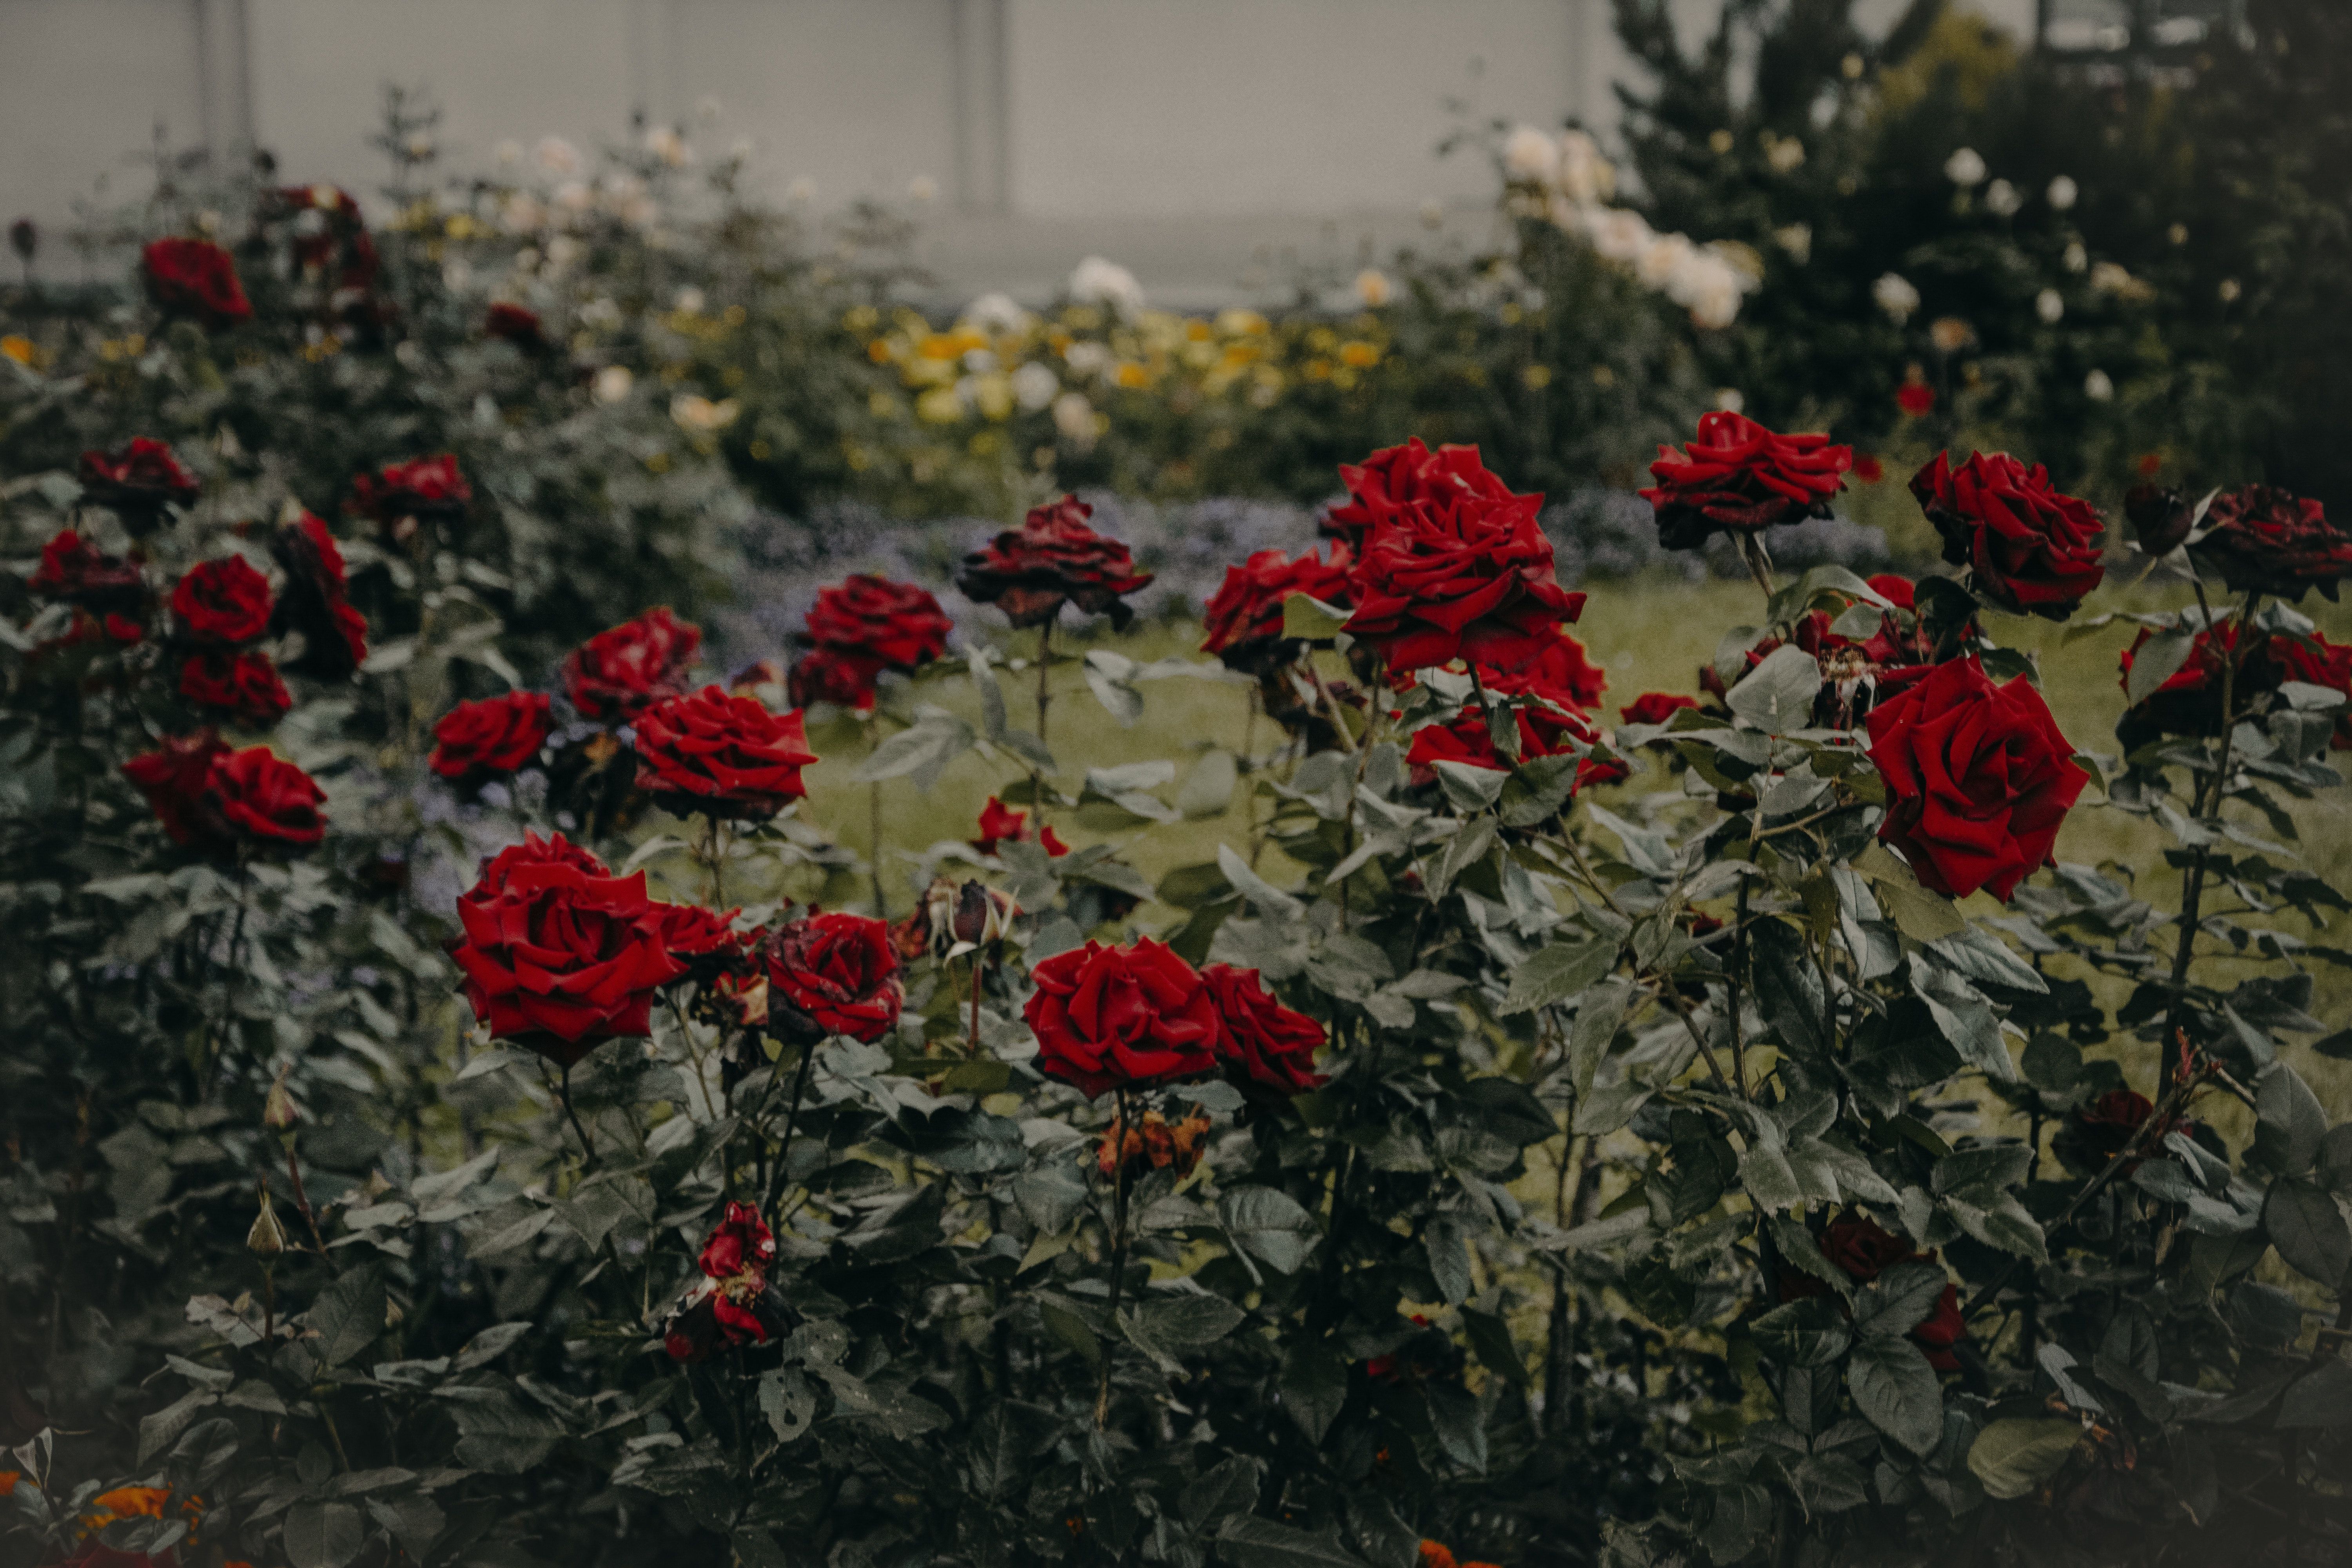 A garden with red roses and green leaves. - Garden